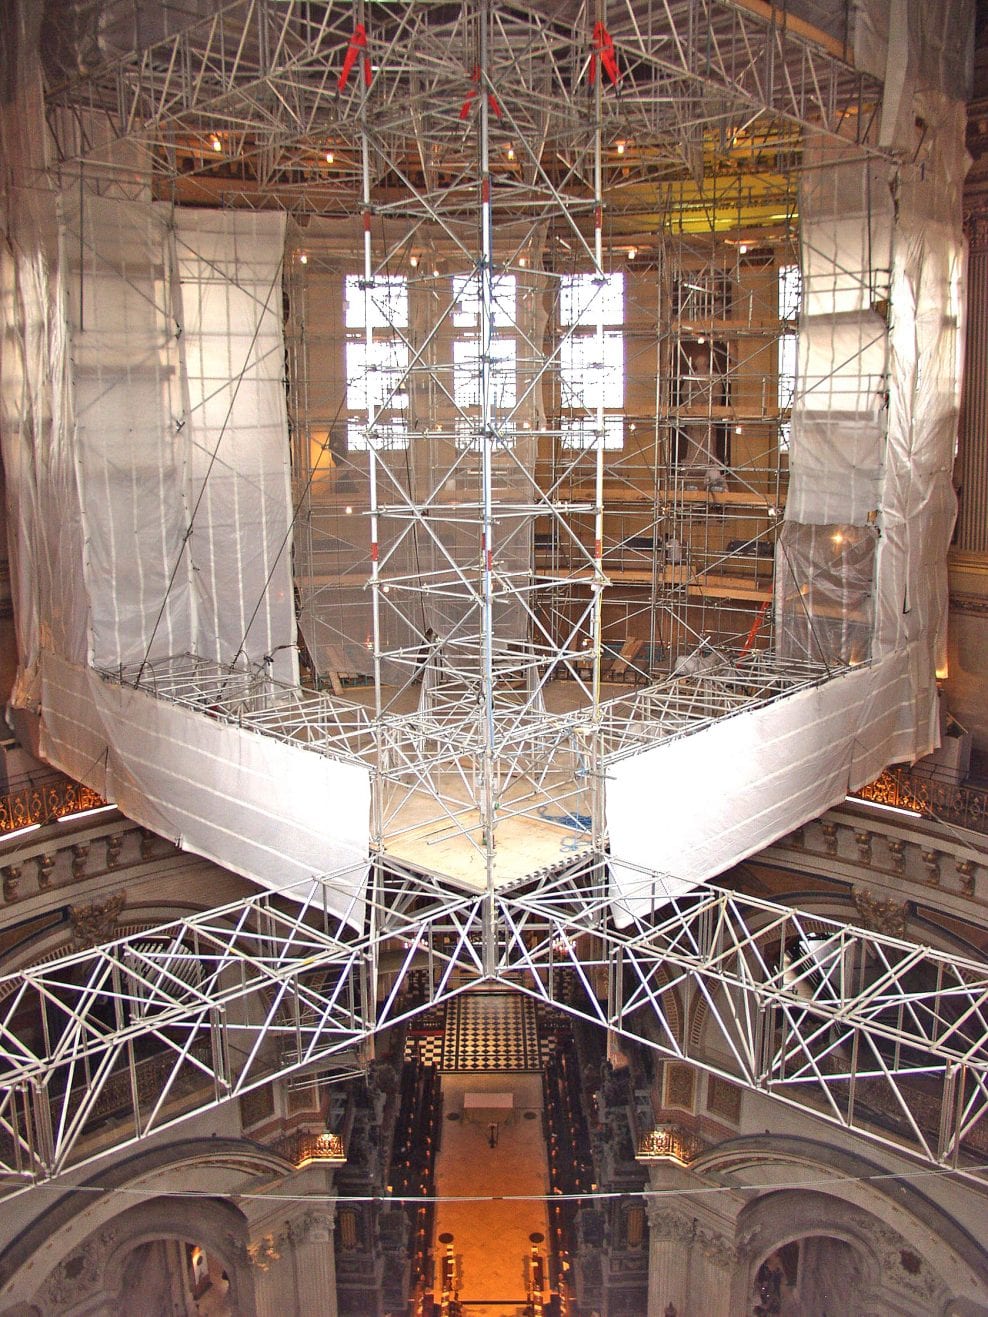 Conservation of the 18th-century scheme of wall paintings by Sir James Thornhill in the dome of St Paul’s Cathedral